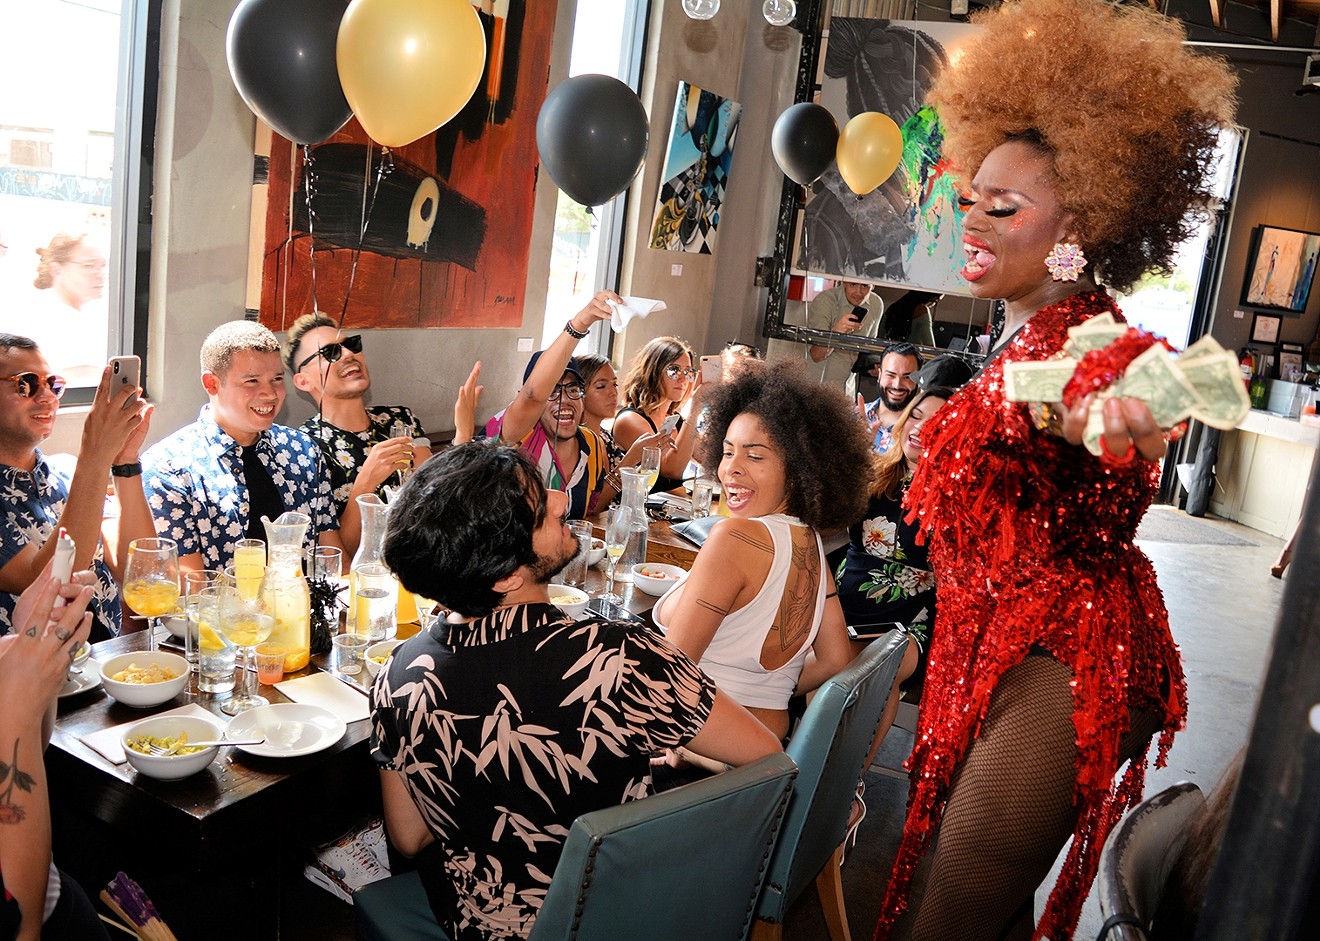 R House in Wynwood is known for its electric drag brunches.